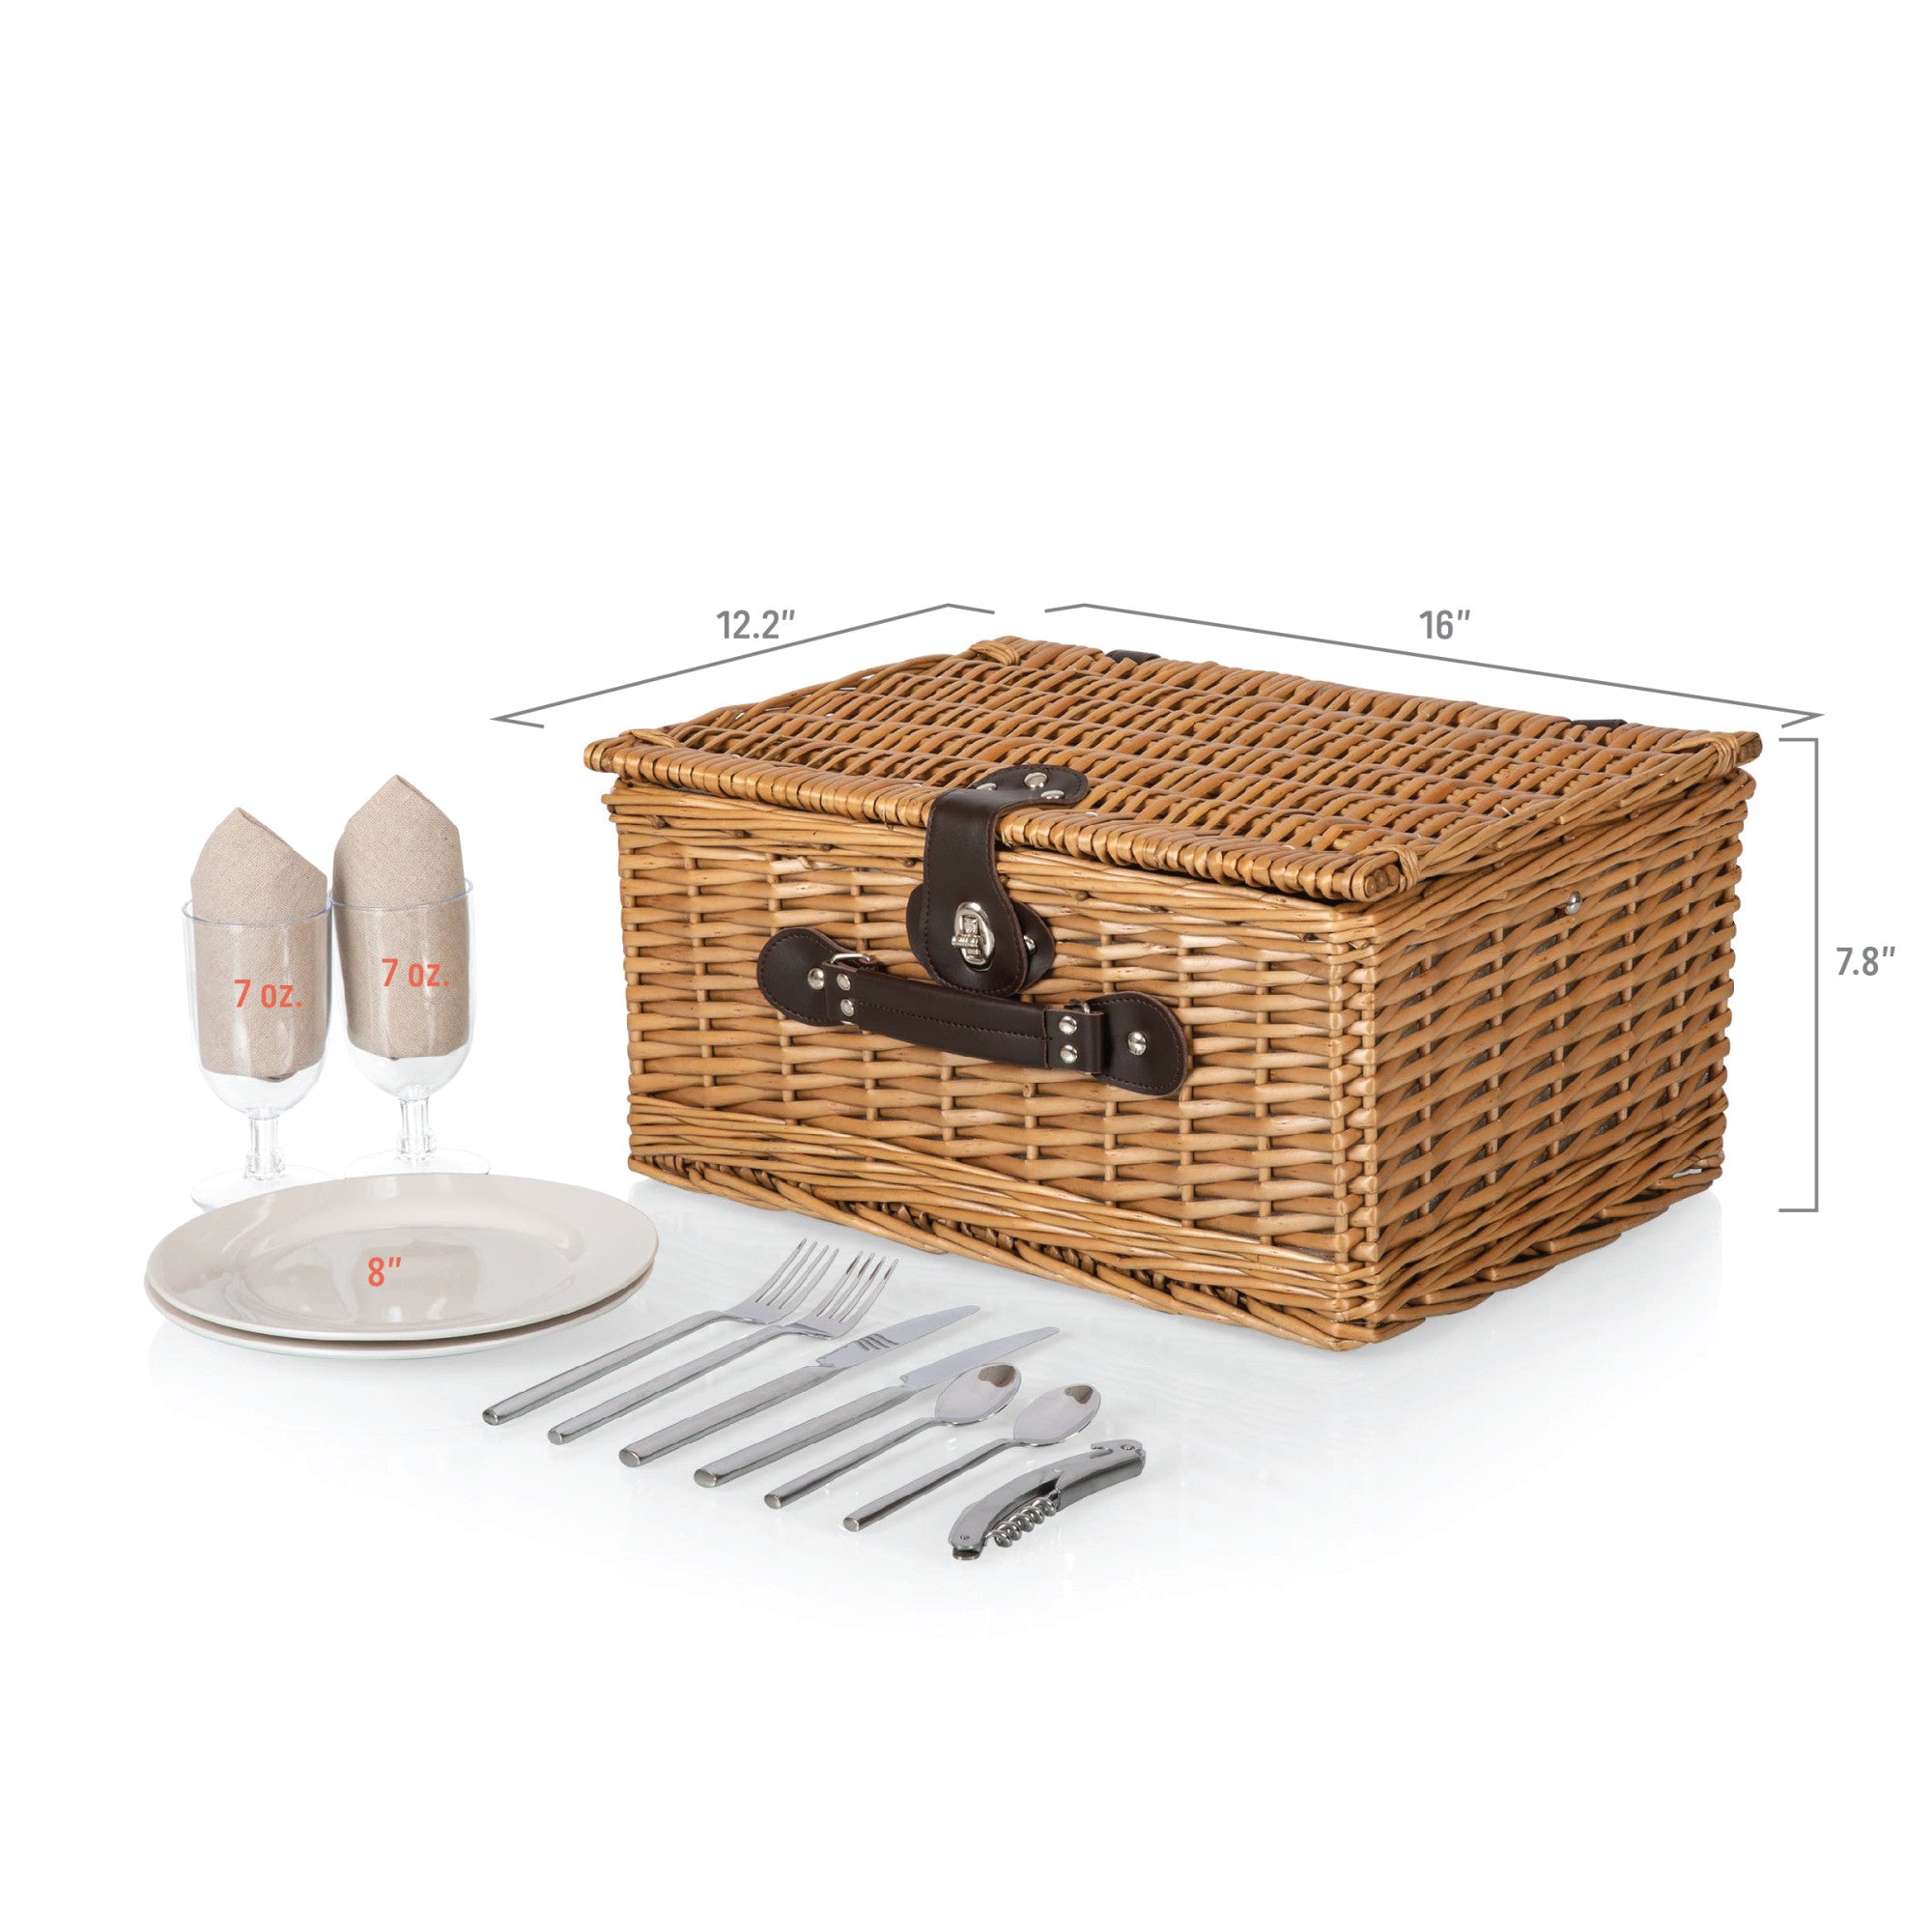 San Francisco Giants - Classic Picnic Basket – PICNIC TIME FAMILY OF BRANDS